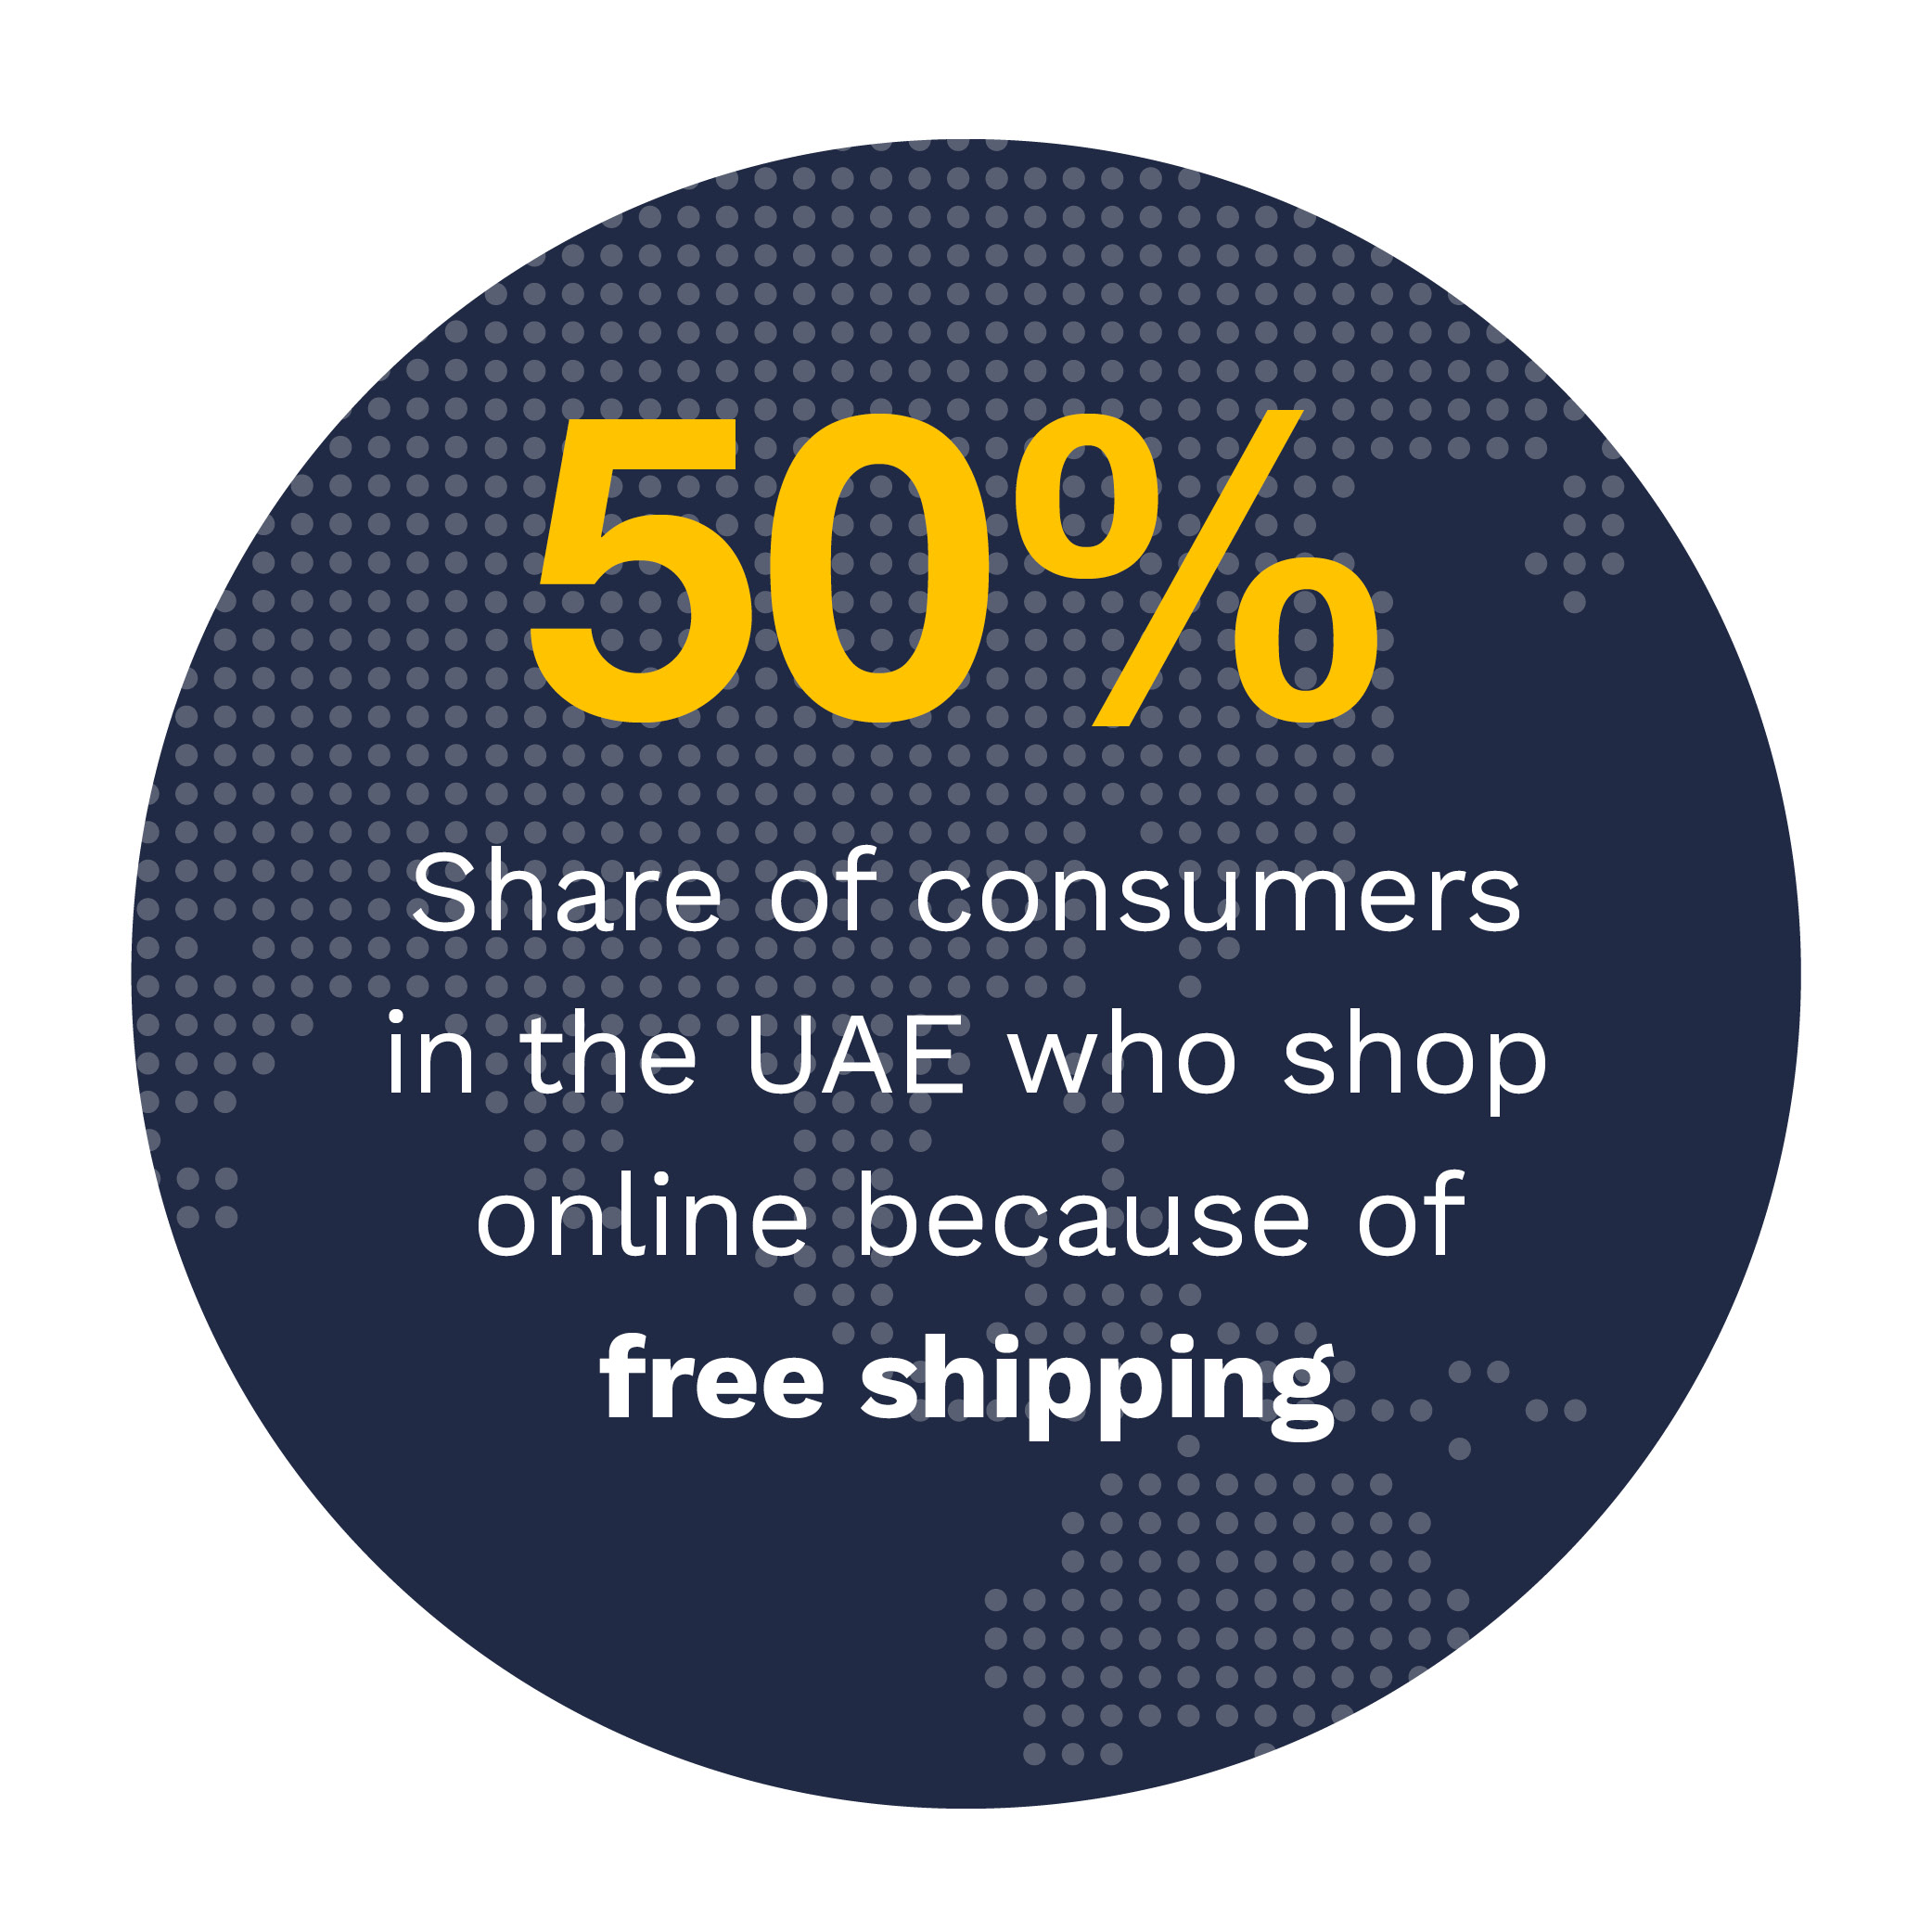 50%: Share of consumers in the UAE who shop online because of free shipping